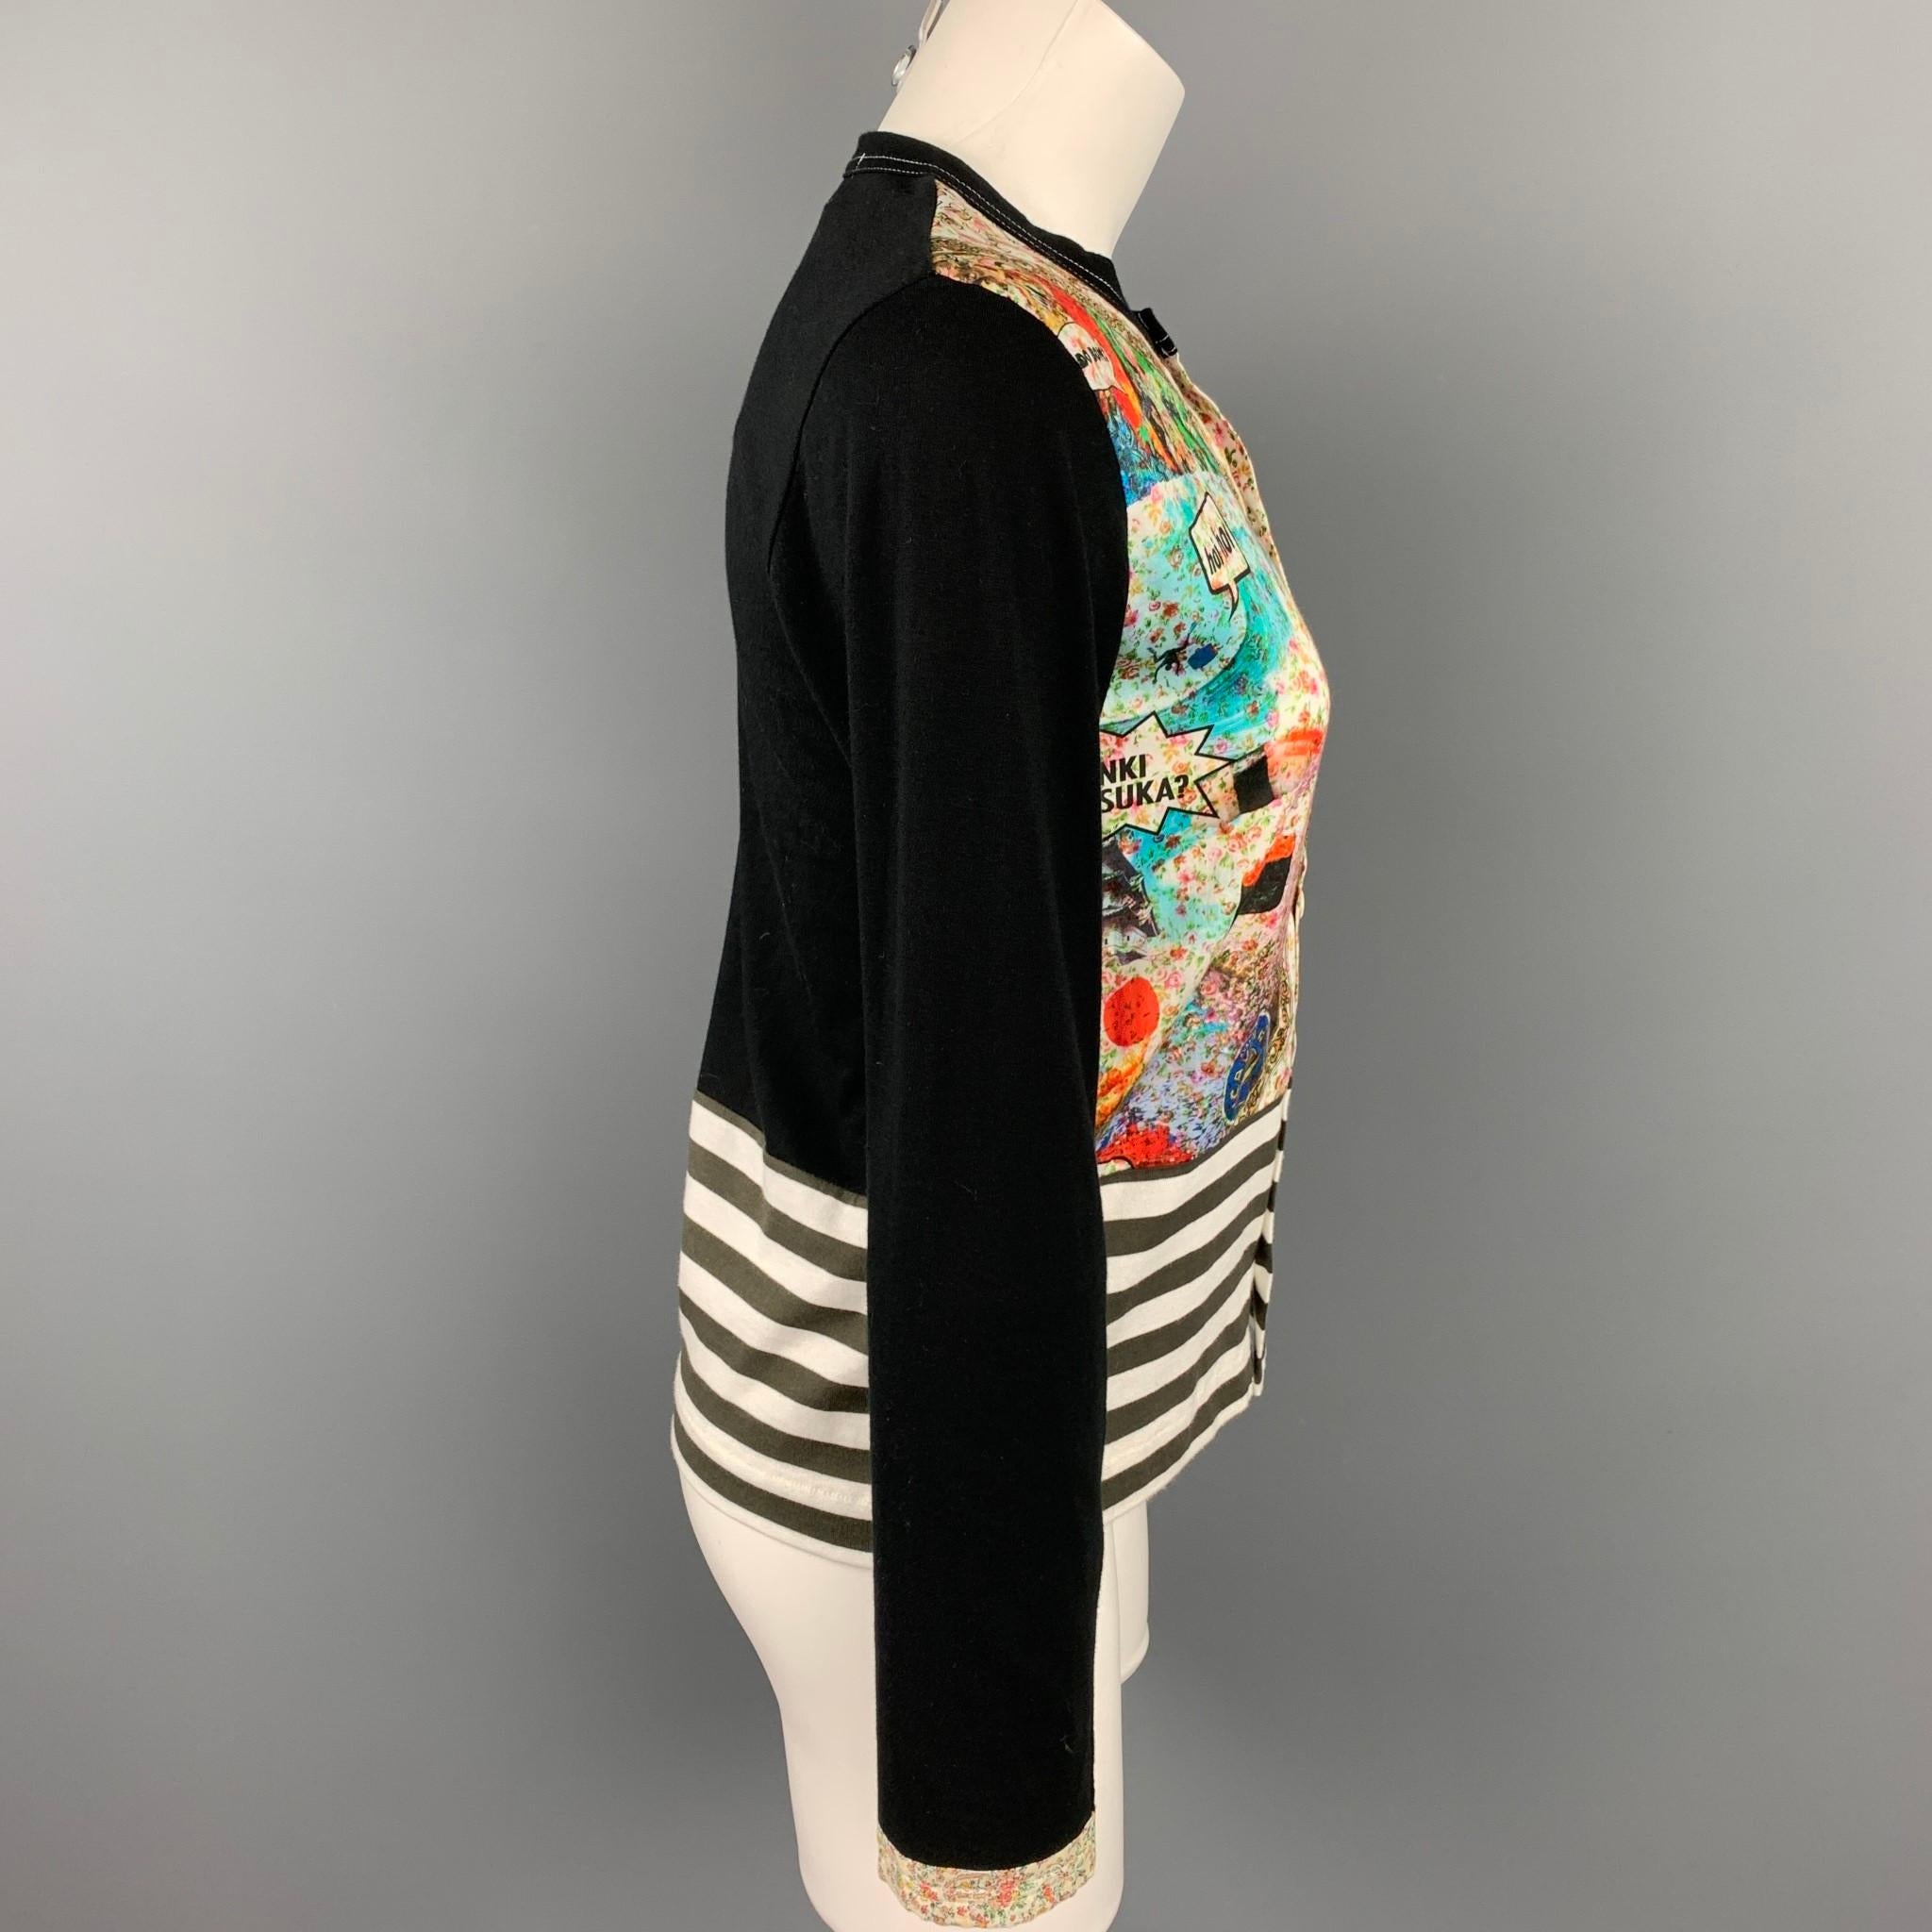 COMME des GARCONS TRICOT sweater comes in a black cotton with a multi-color patchwork design featuring a buttoned closure. Made in Japan.

Very Good Pre-Owned Condition.
Marked: S / AD2015

Measurements:

Shoulder: 14.5 in.
Bust: 35 in.
Sleeve: 23.5